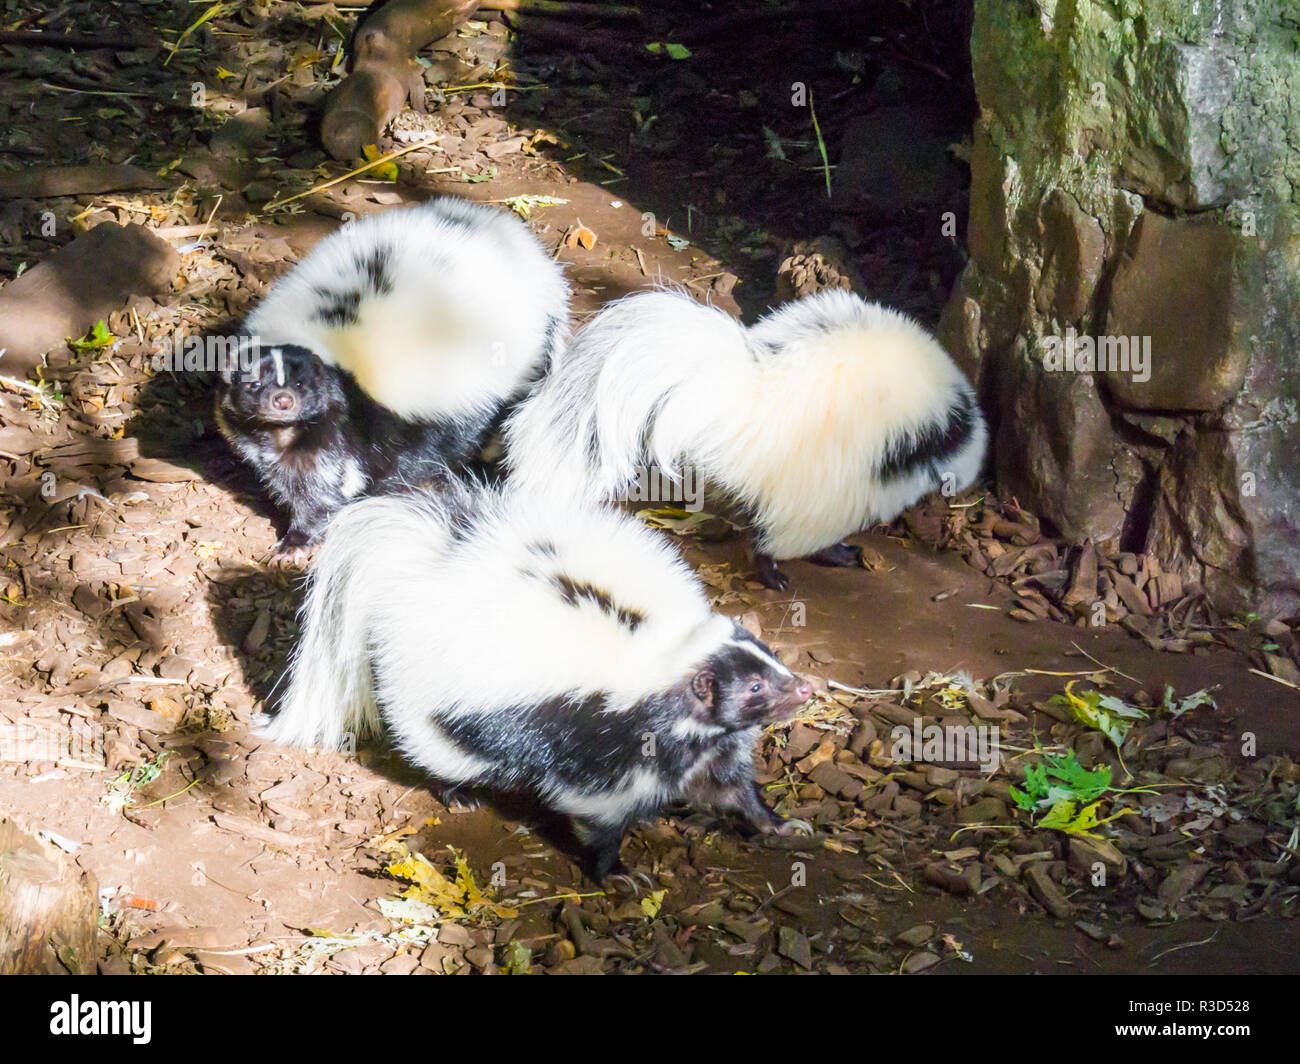 family of black and white common striped skunks standing together wild animals from canada Stock Photo